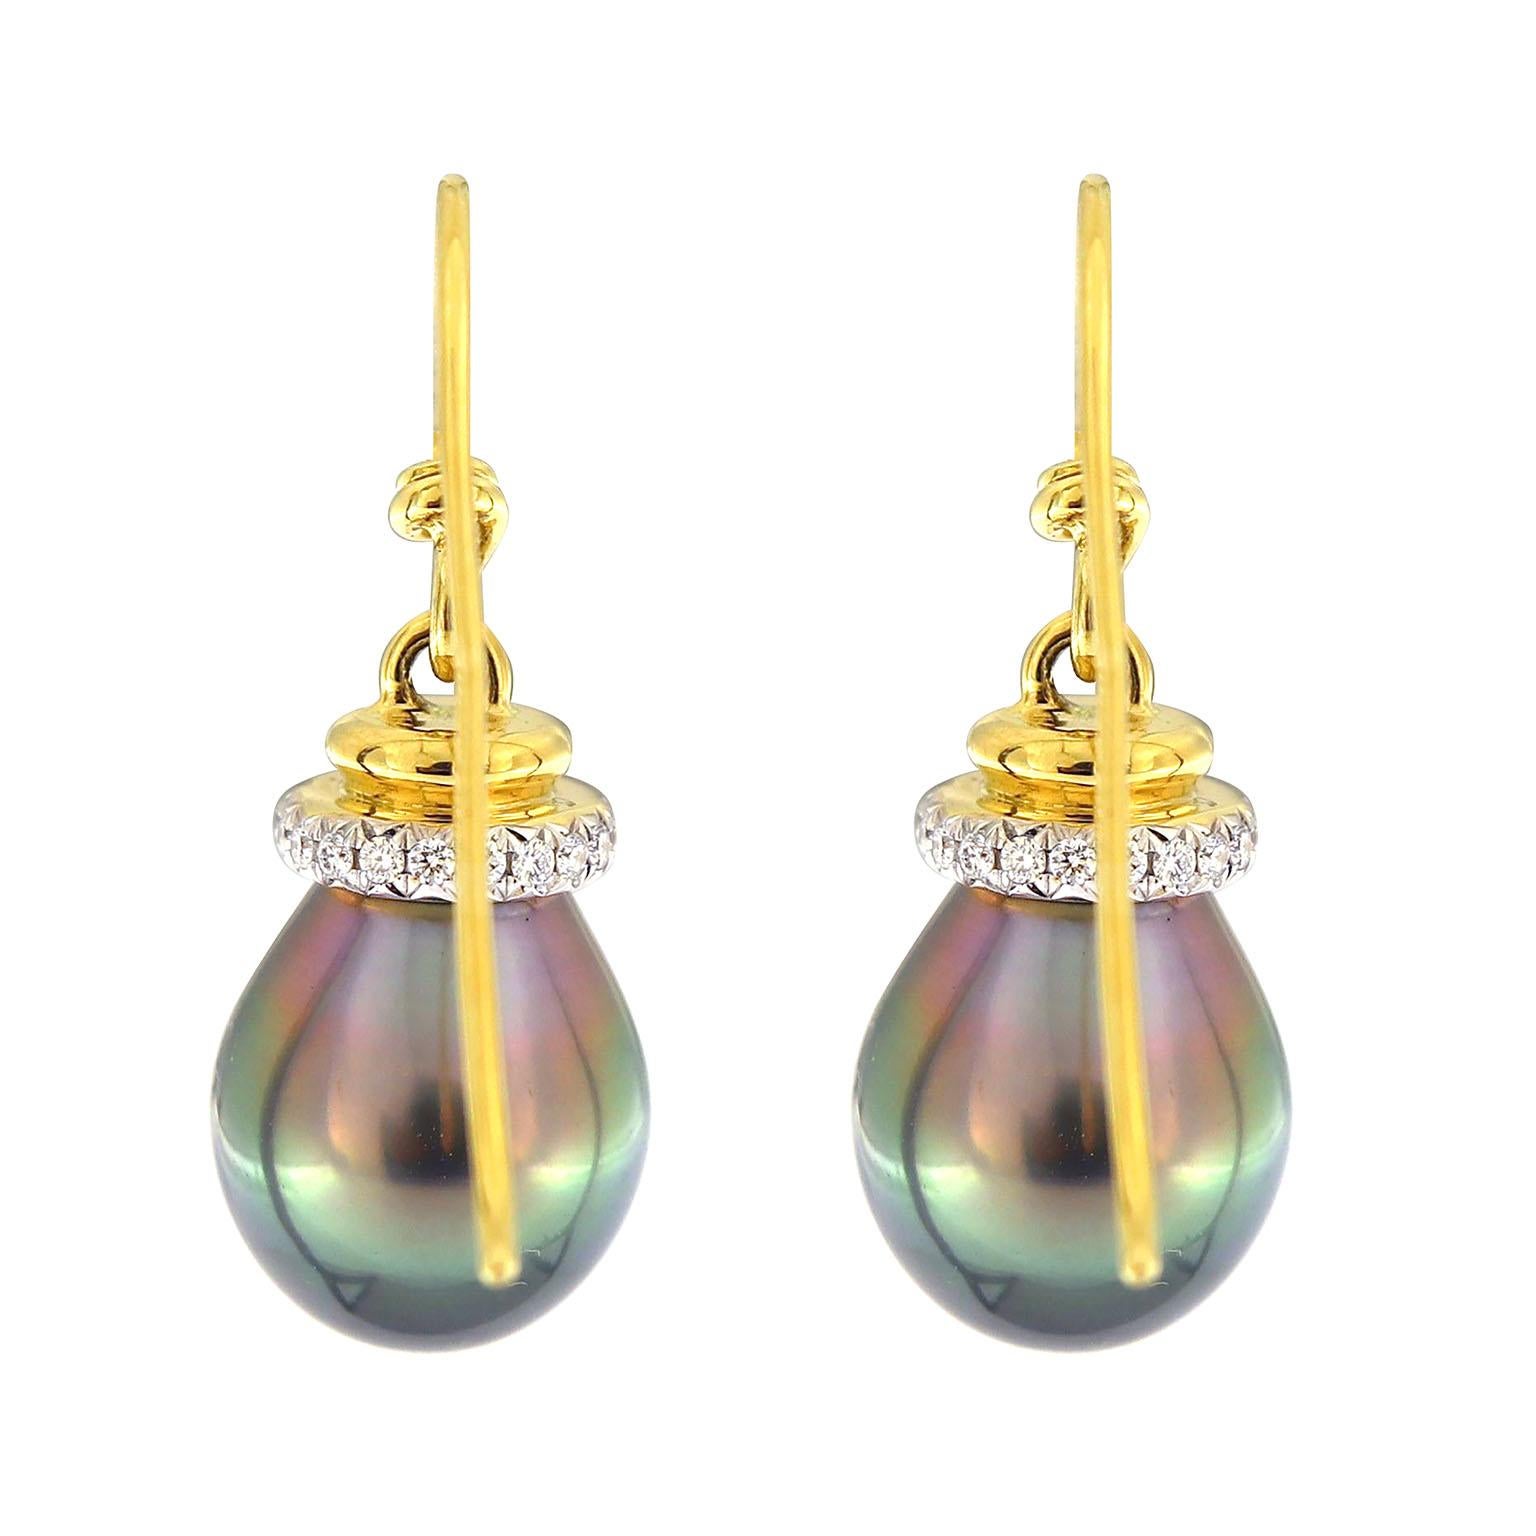 French Cut Valentin Magro Tahitian Pearl Earrings with Diamond Cap and French Wire